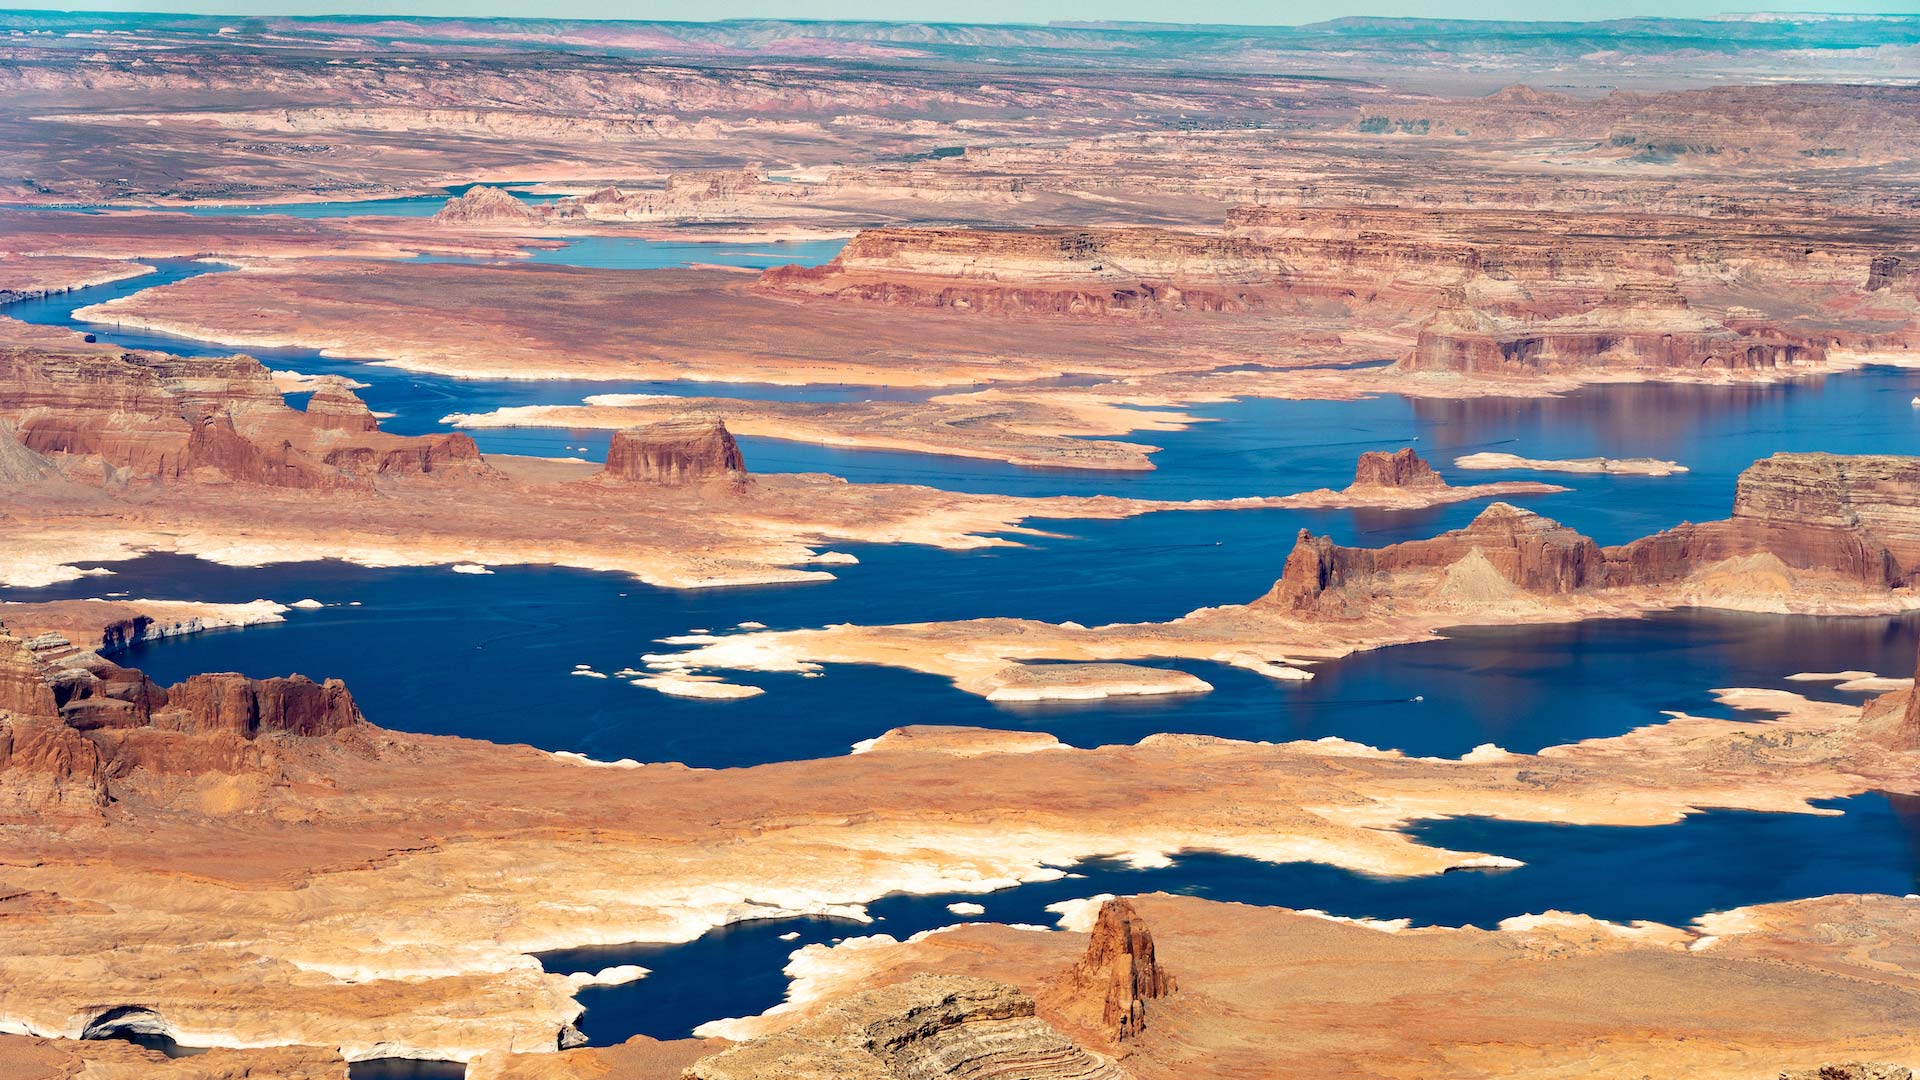 Water levels in Lake Powell, seen here in May 2021, are dipping dangerously low. The federal government has proposed an unprecedented plan to cut back on water supplies for Arizona, Nevada and California. The measure aims to keep water levels high enough to generate hydropower at the Glen Canyon Dam.